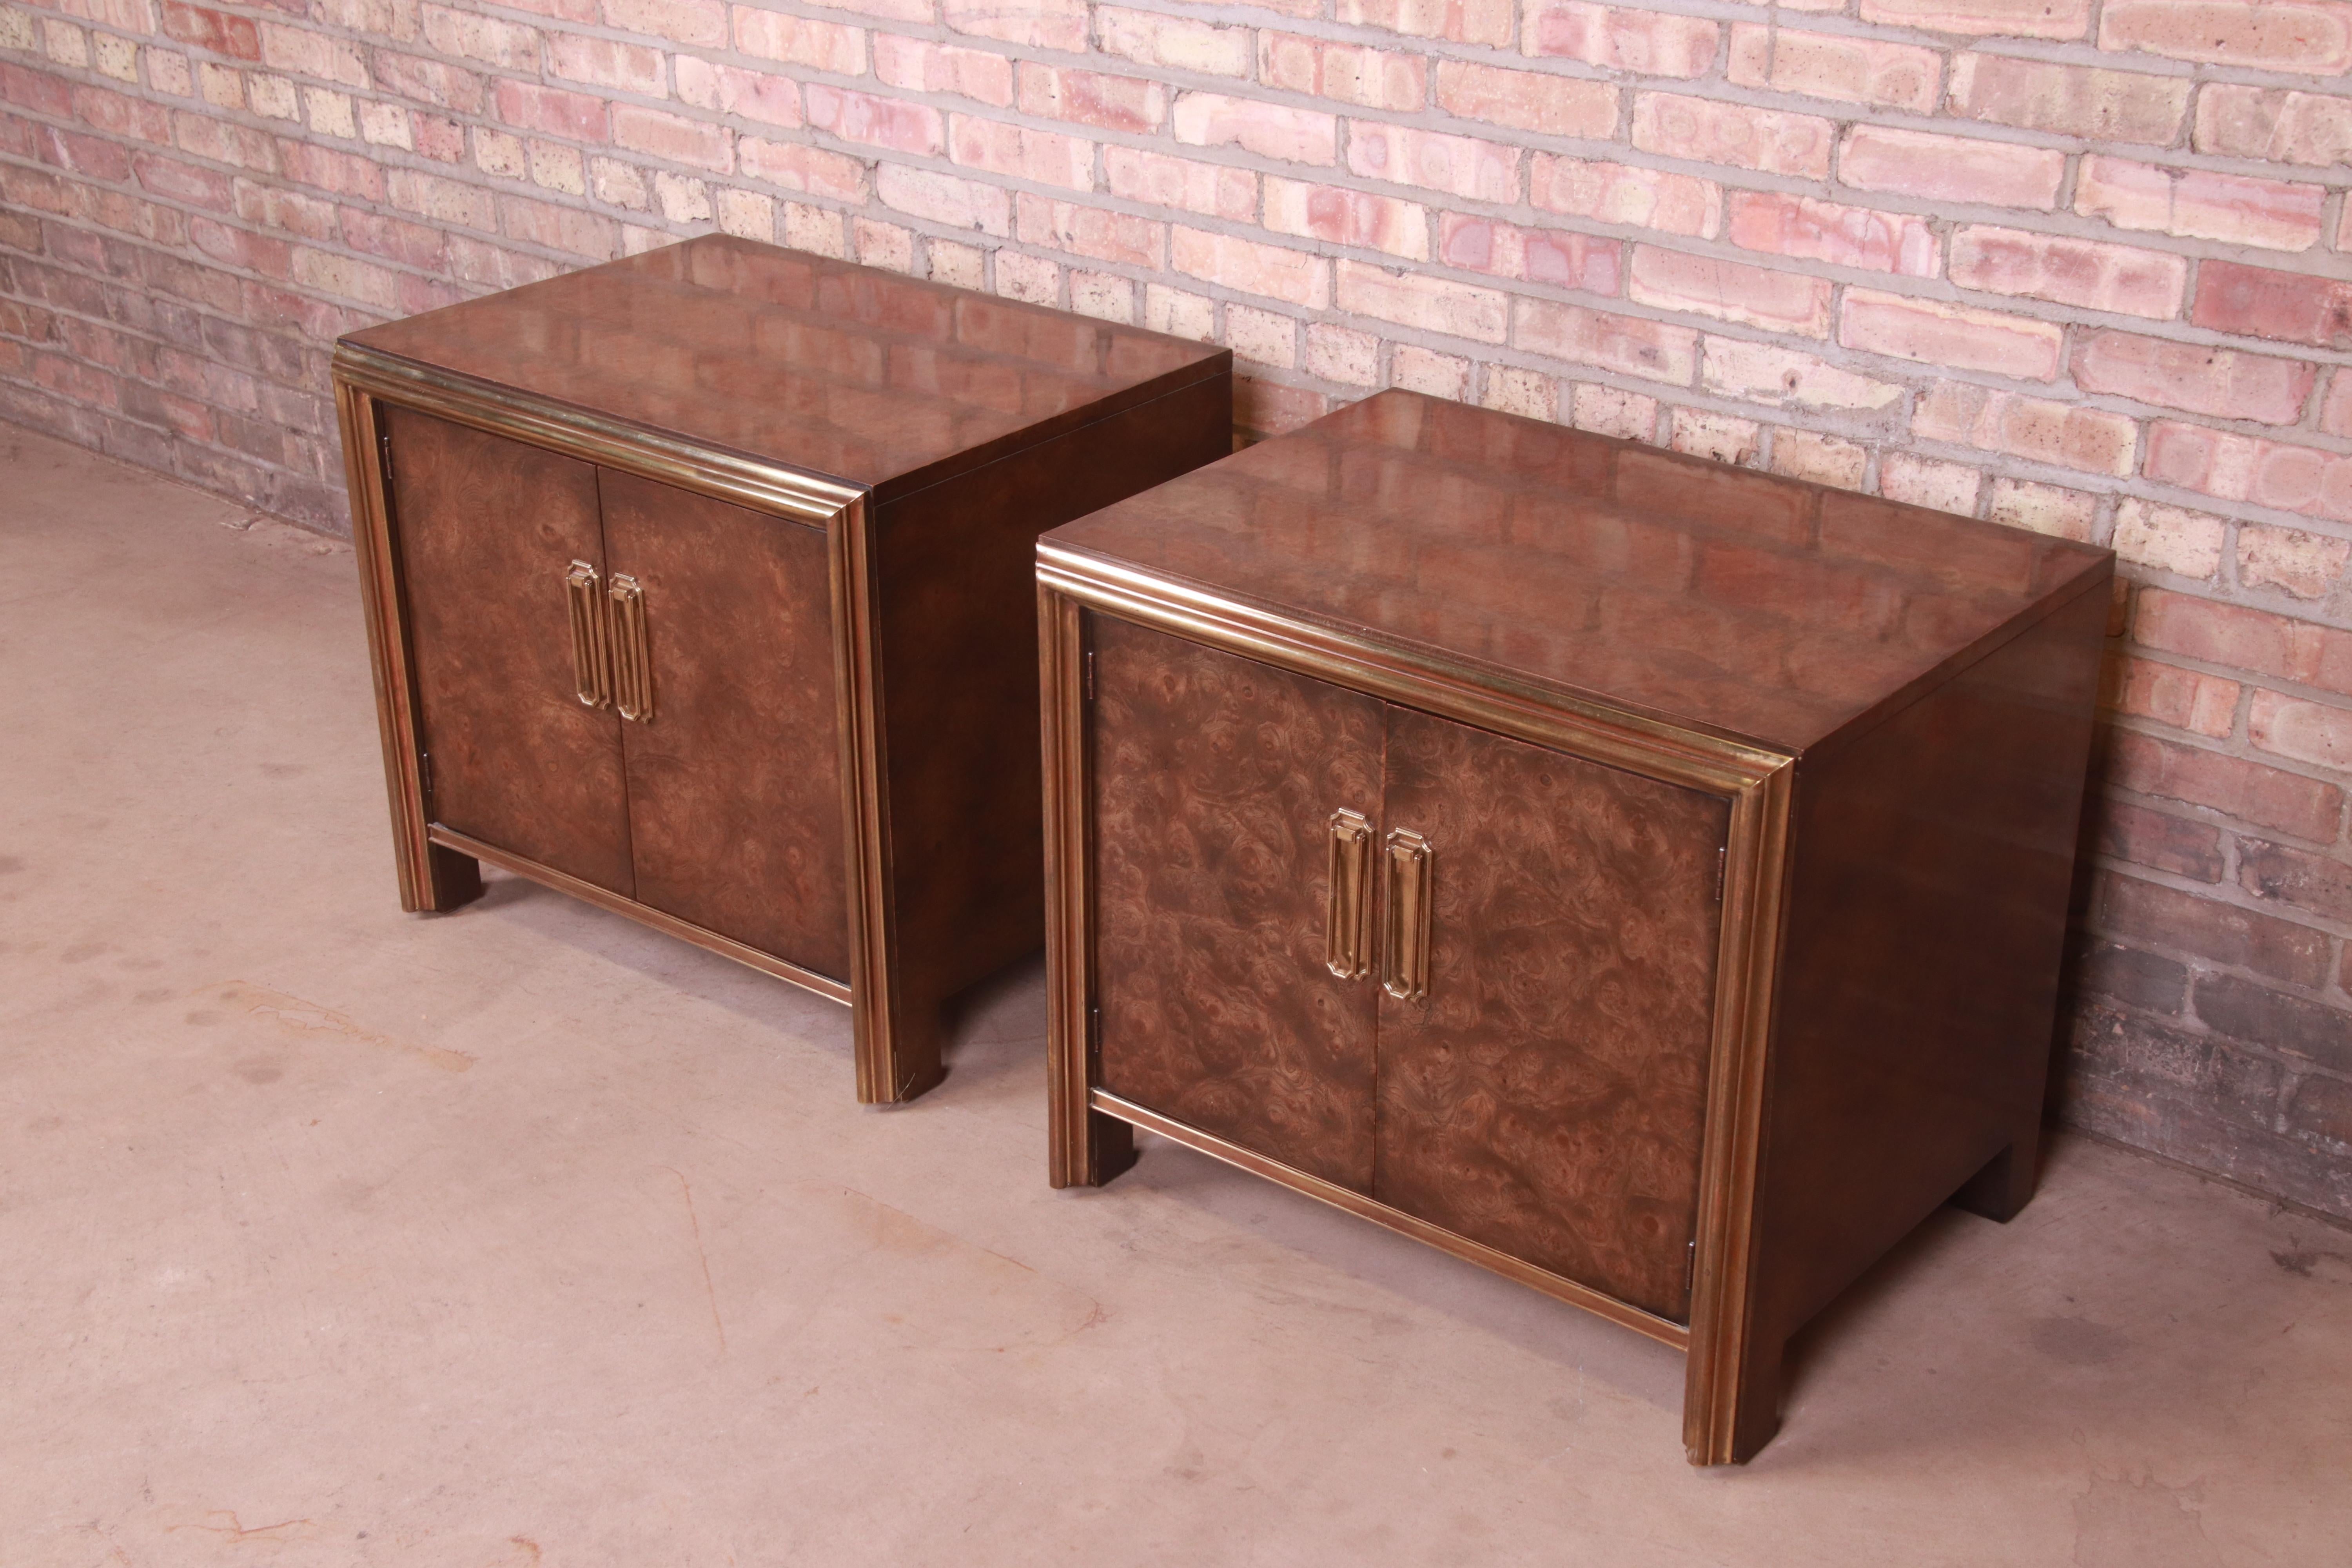 American Mastercraft Hollywood Regency Burl Wood and Brass Nightstands, 1970s For Sale